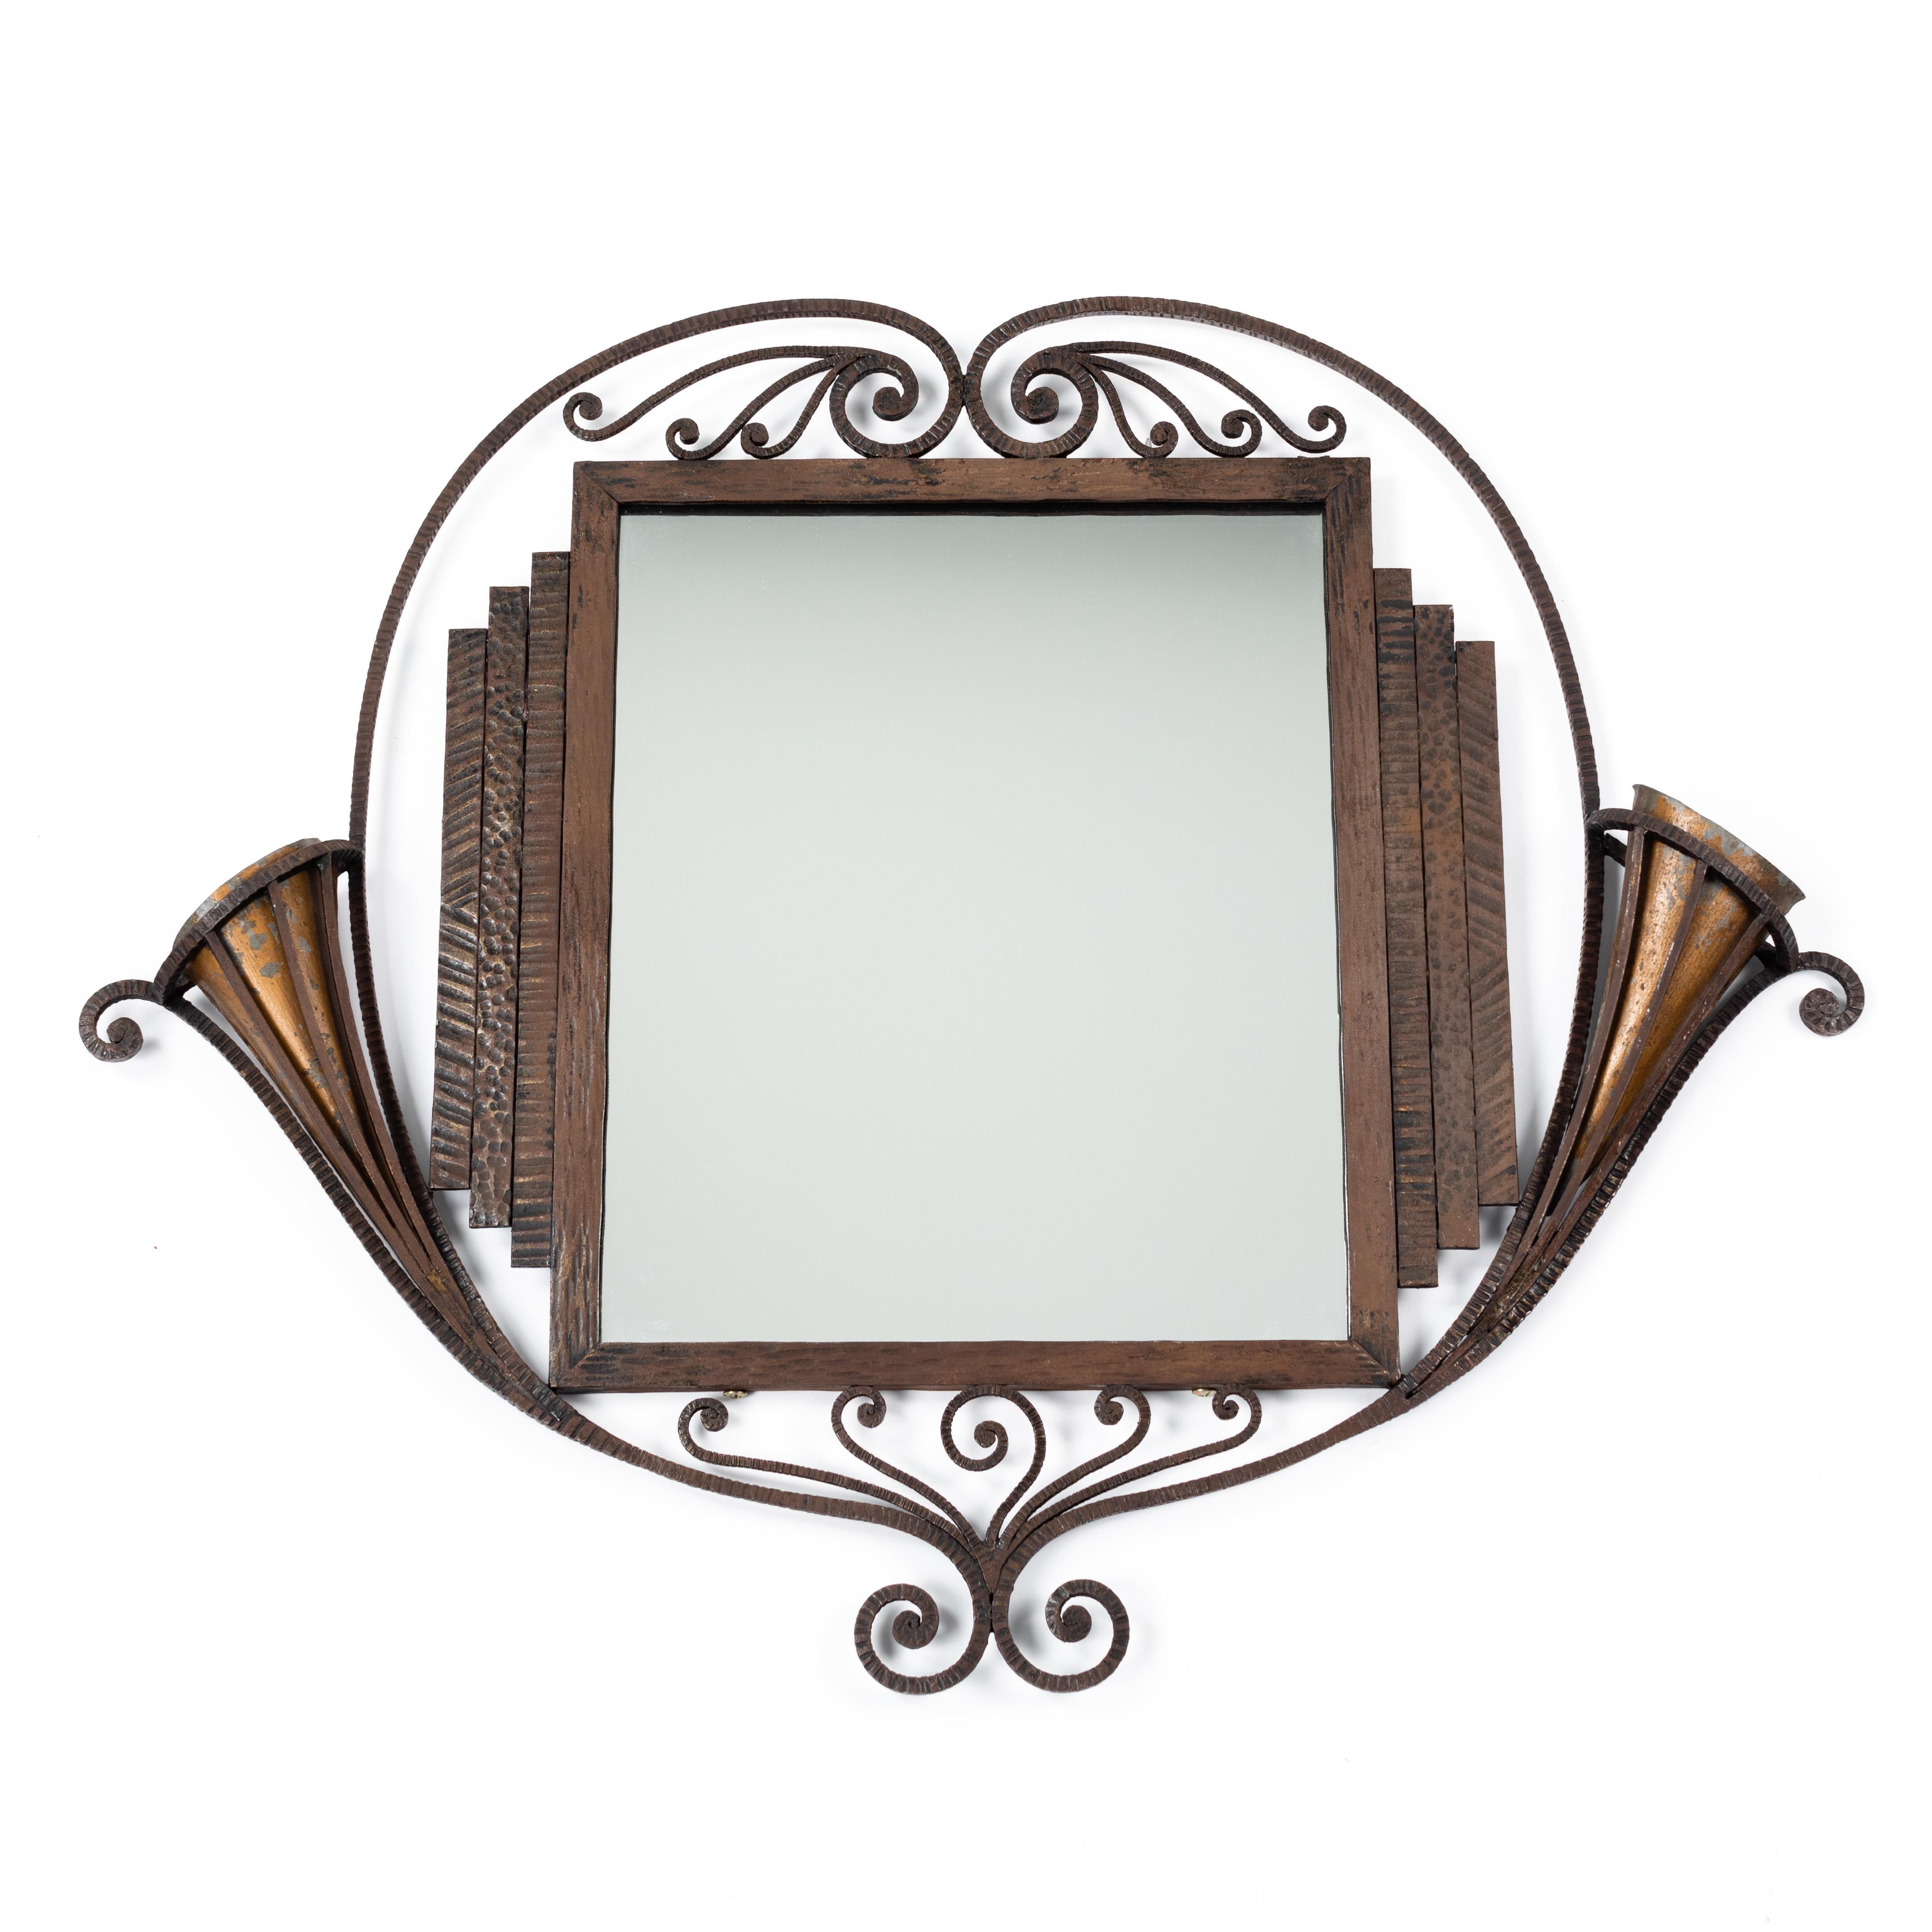 Rare and very special French forgend iron Art Deco mirror form the early 1920s by Charles Piguet

The rectangular frame is made of forged iron (with fluted surface). 
On the right and left appear geometric, stepped elements - top and bottom floral,